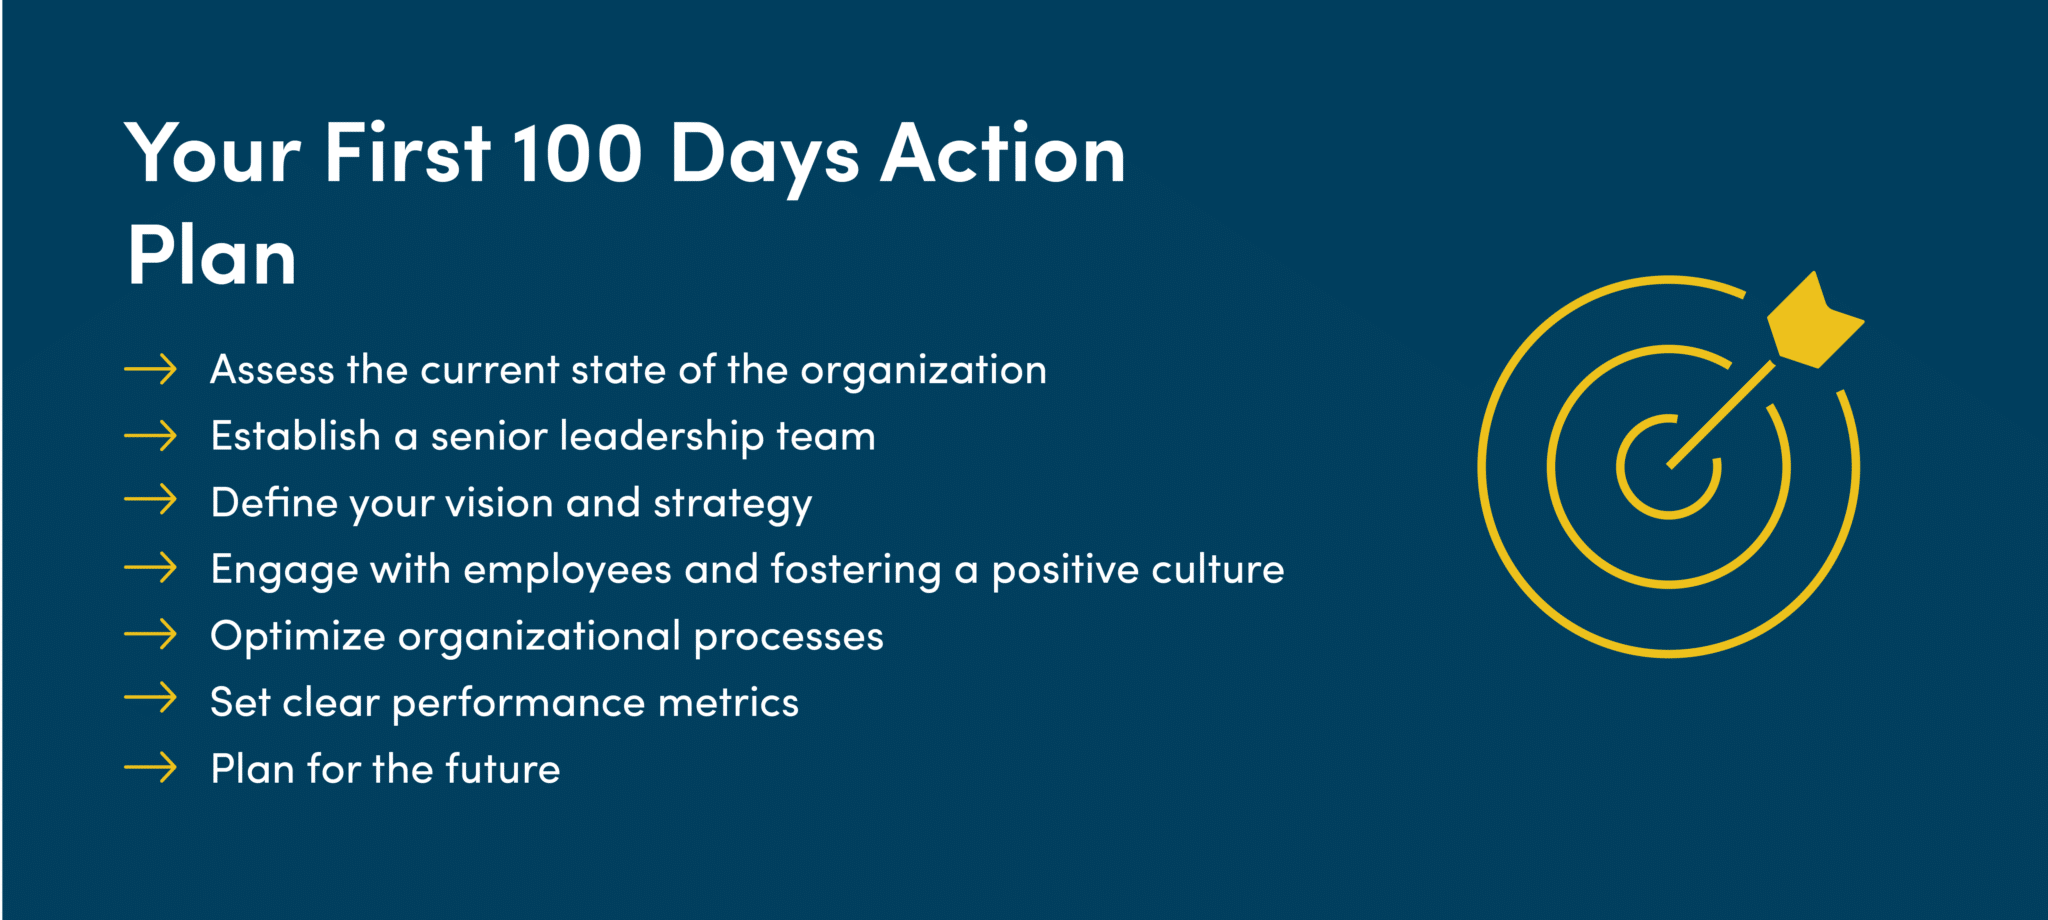 Your first 100 days action plan